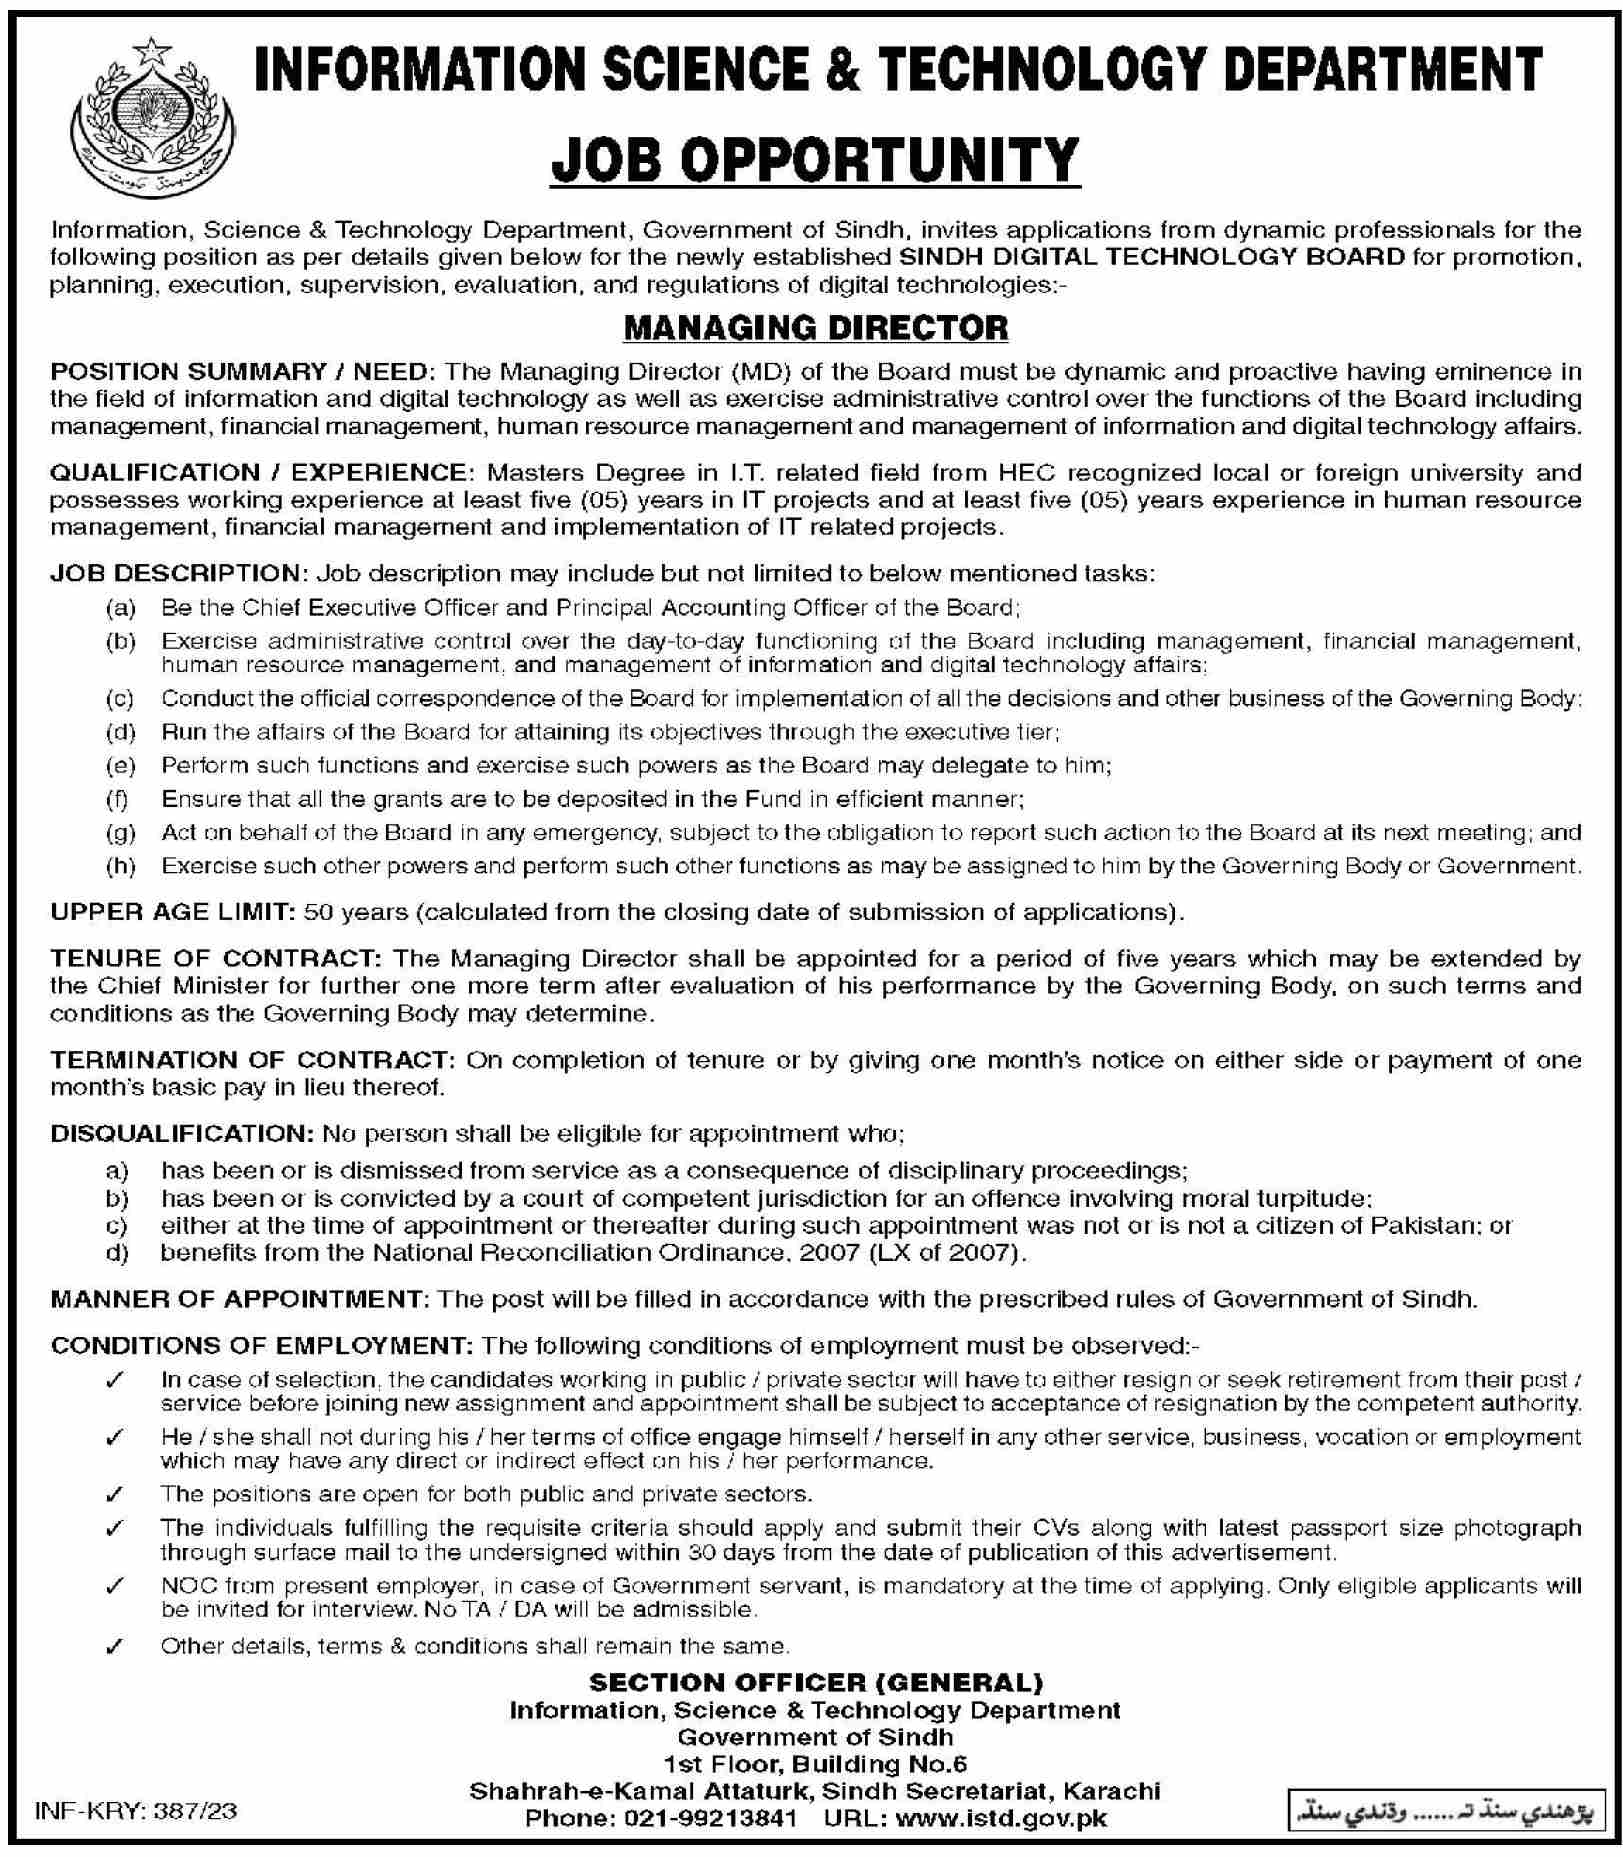 Information Science and Technology Department Jobs